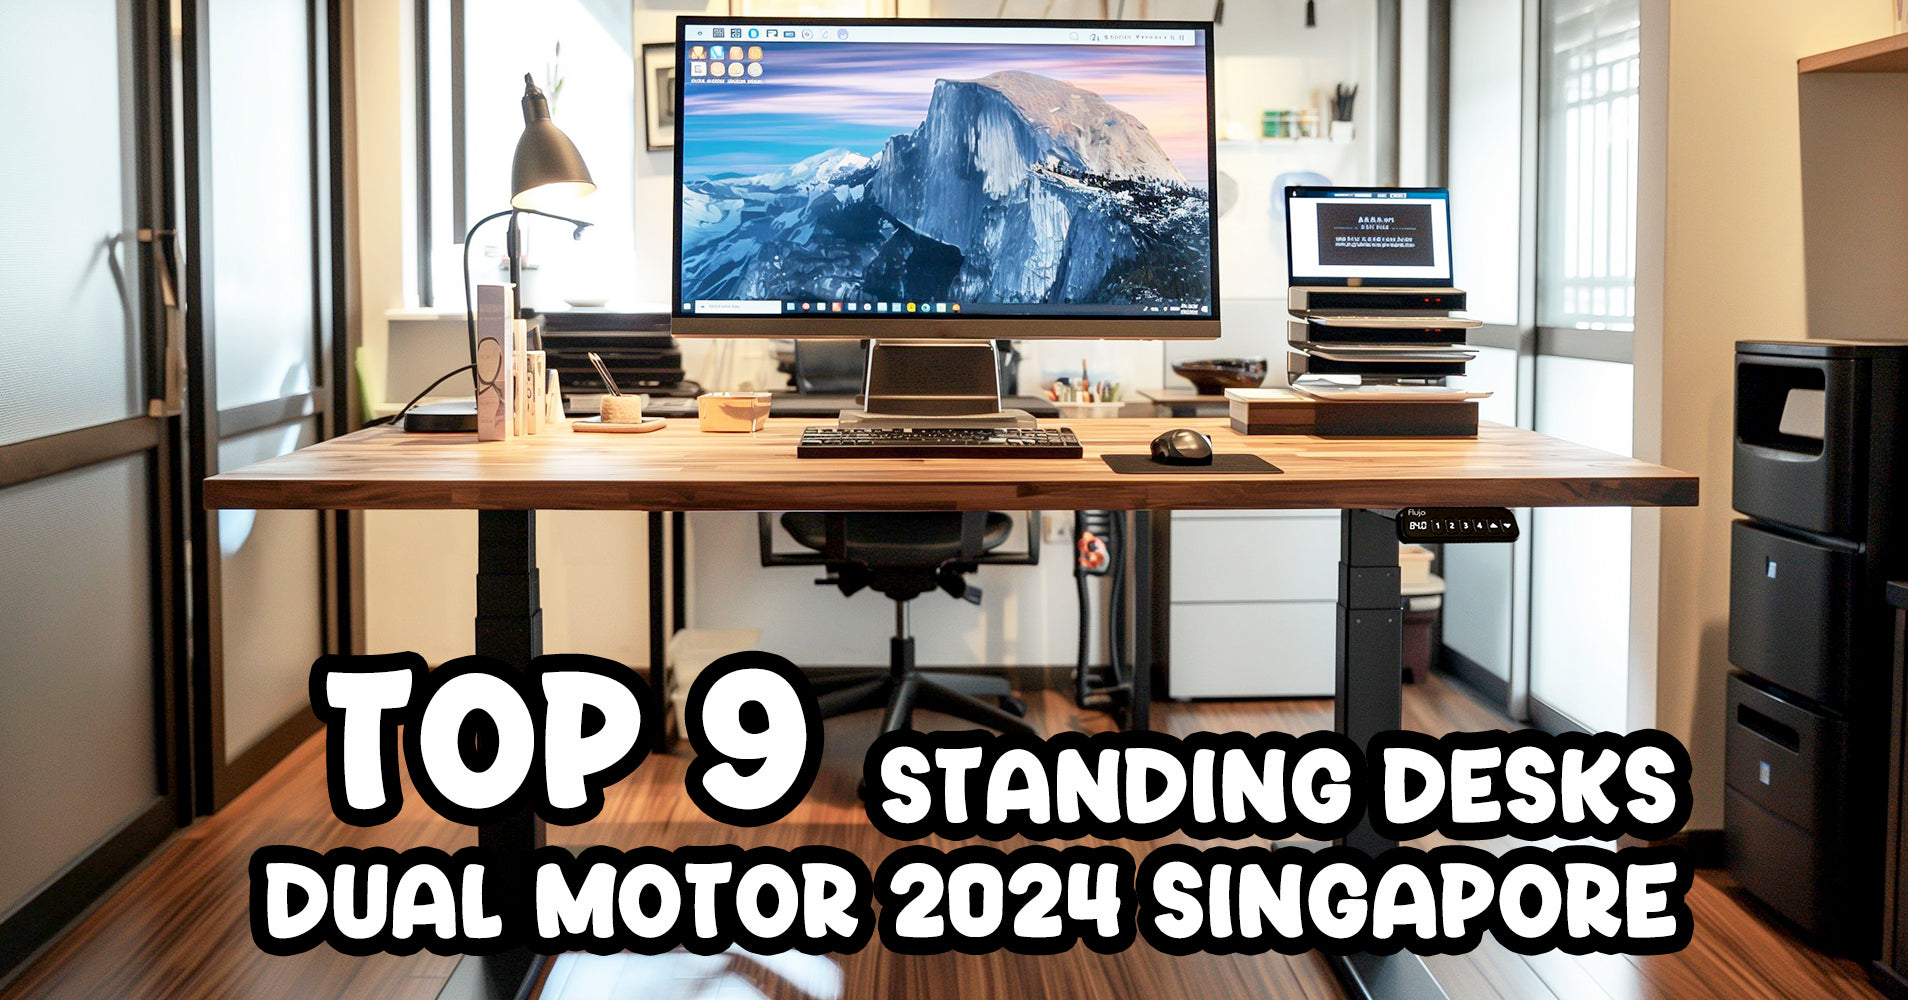 Banner for 'Best 9 Standing Desks Dual Motor 2024 Singapore' with a fully-equipped standing desk setup in a home office.